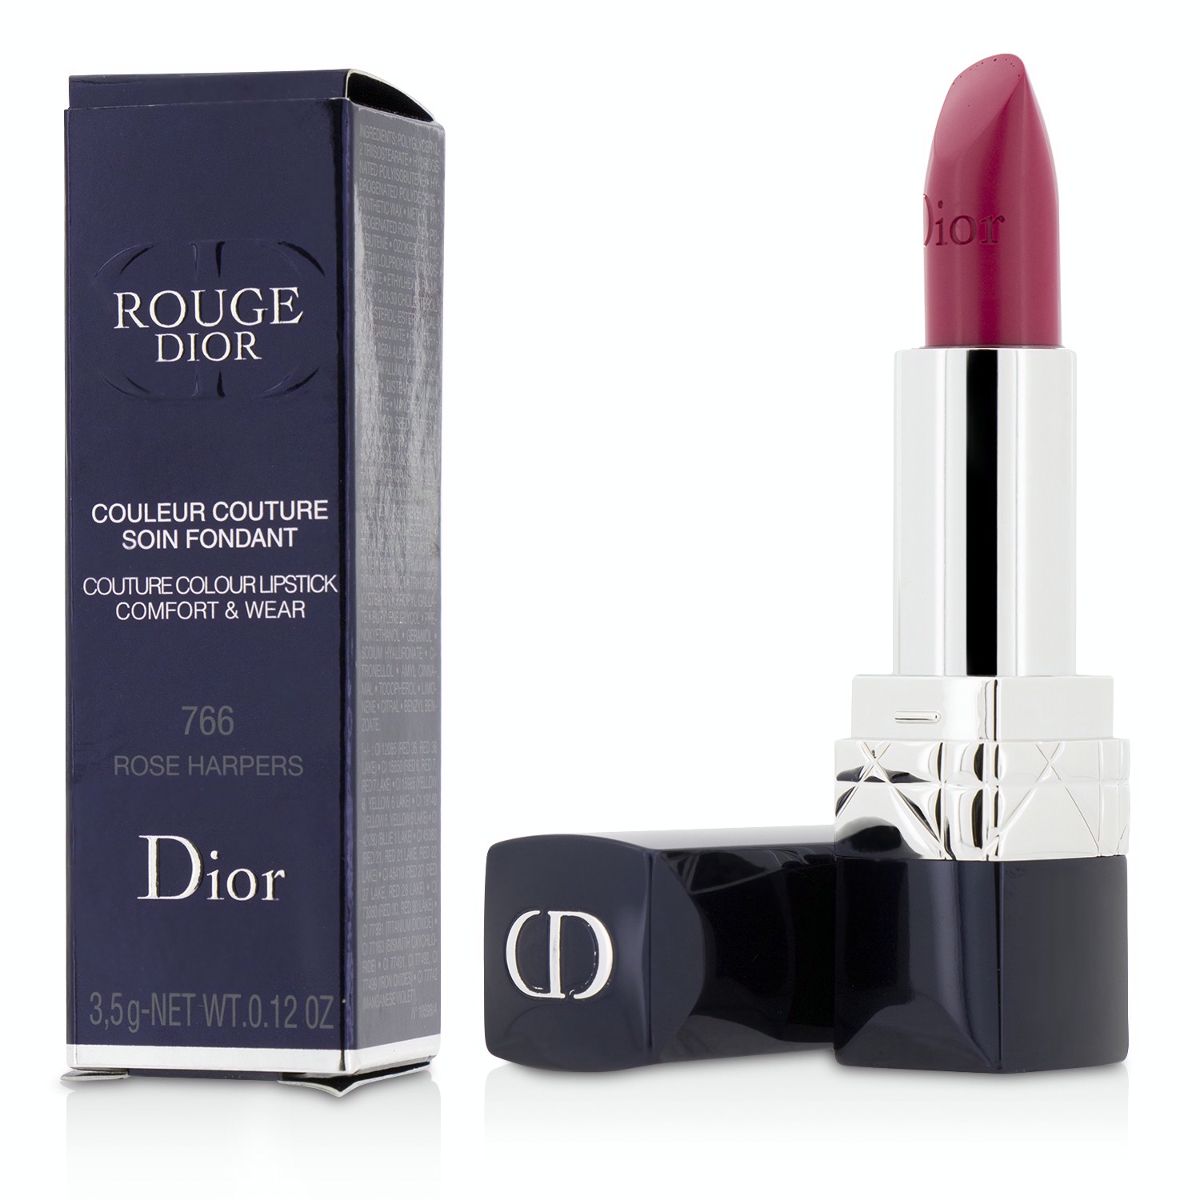 Rouge Dior Couture Colour Comfort  Wear Lipstick - # 766 Rose Harpers Christian Dior Image